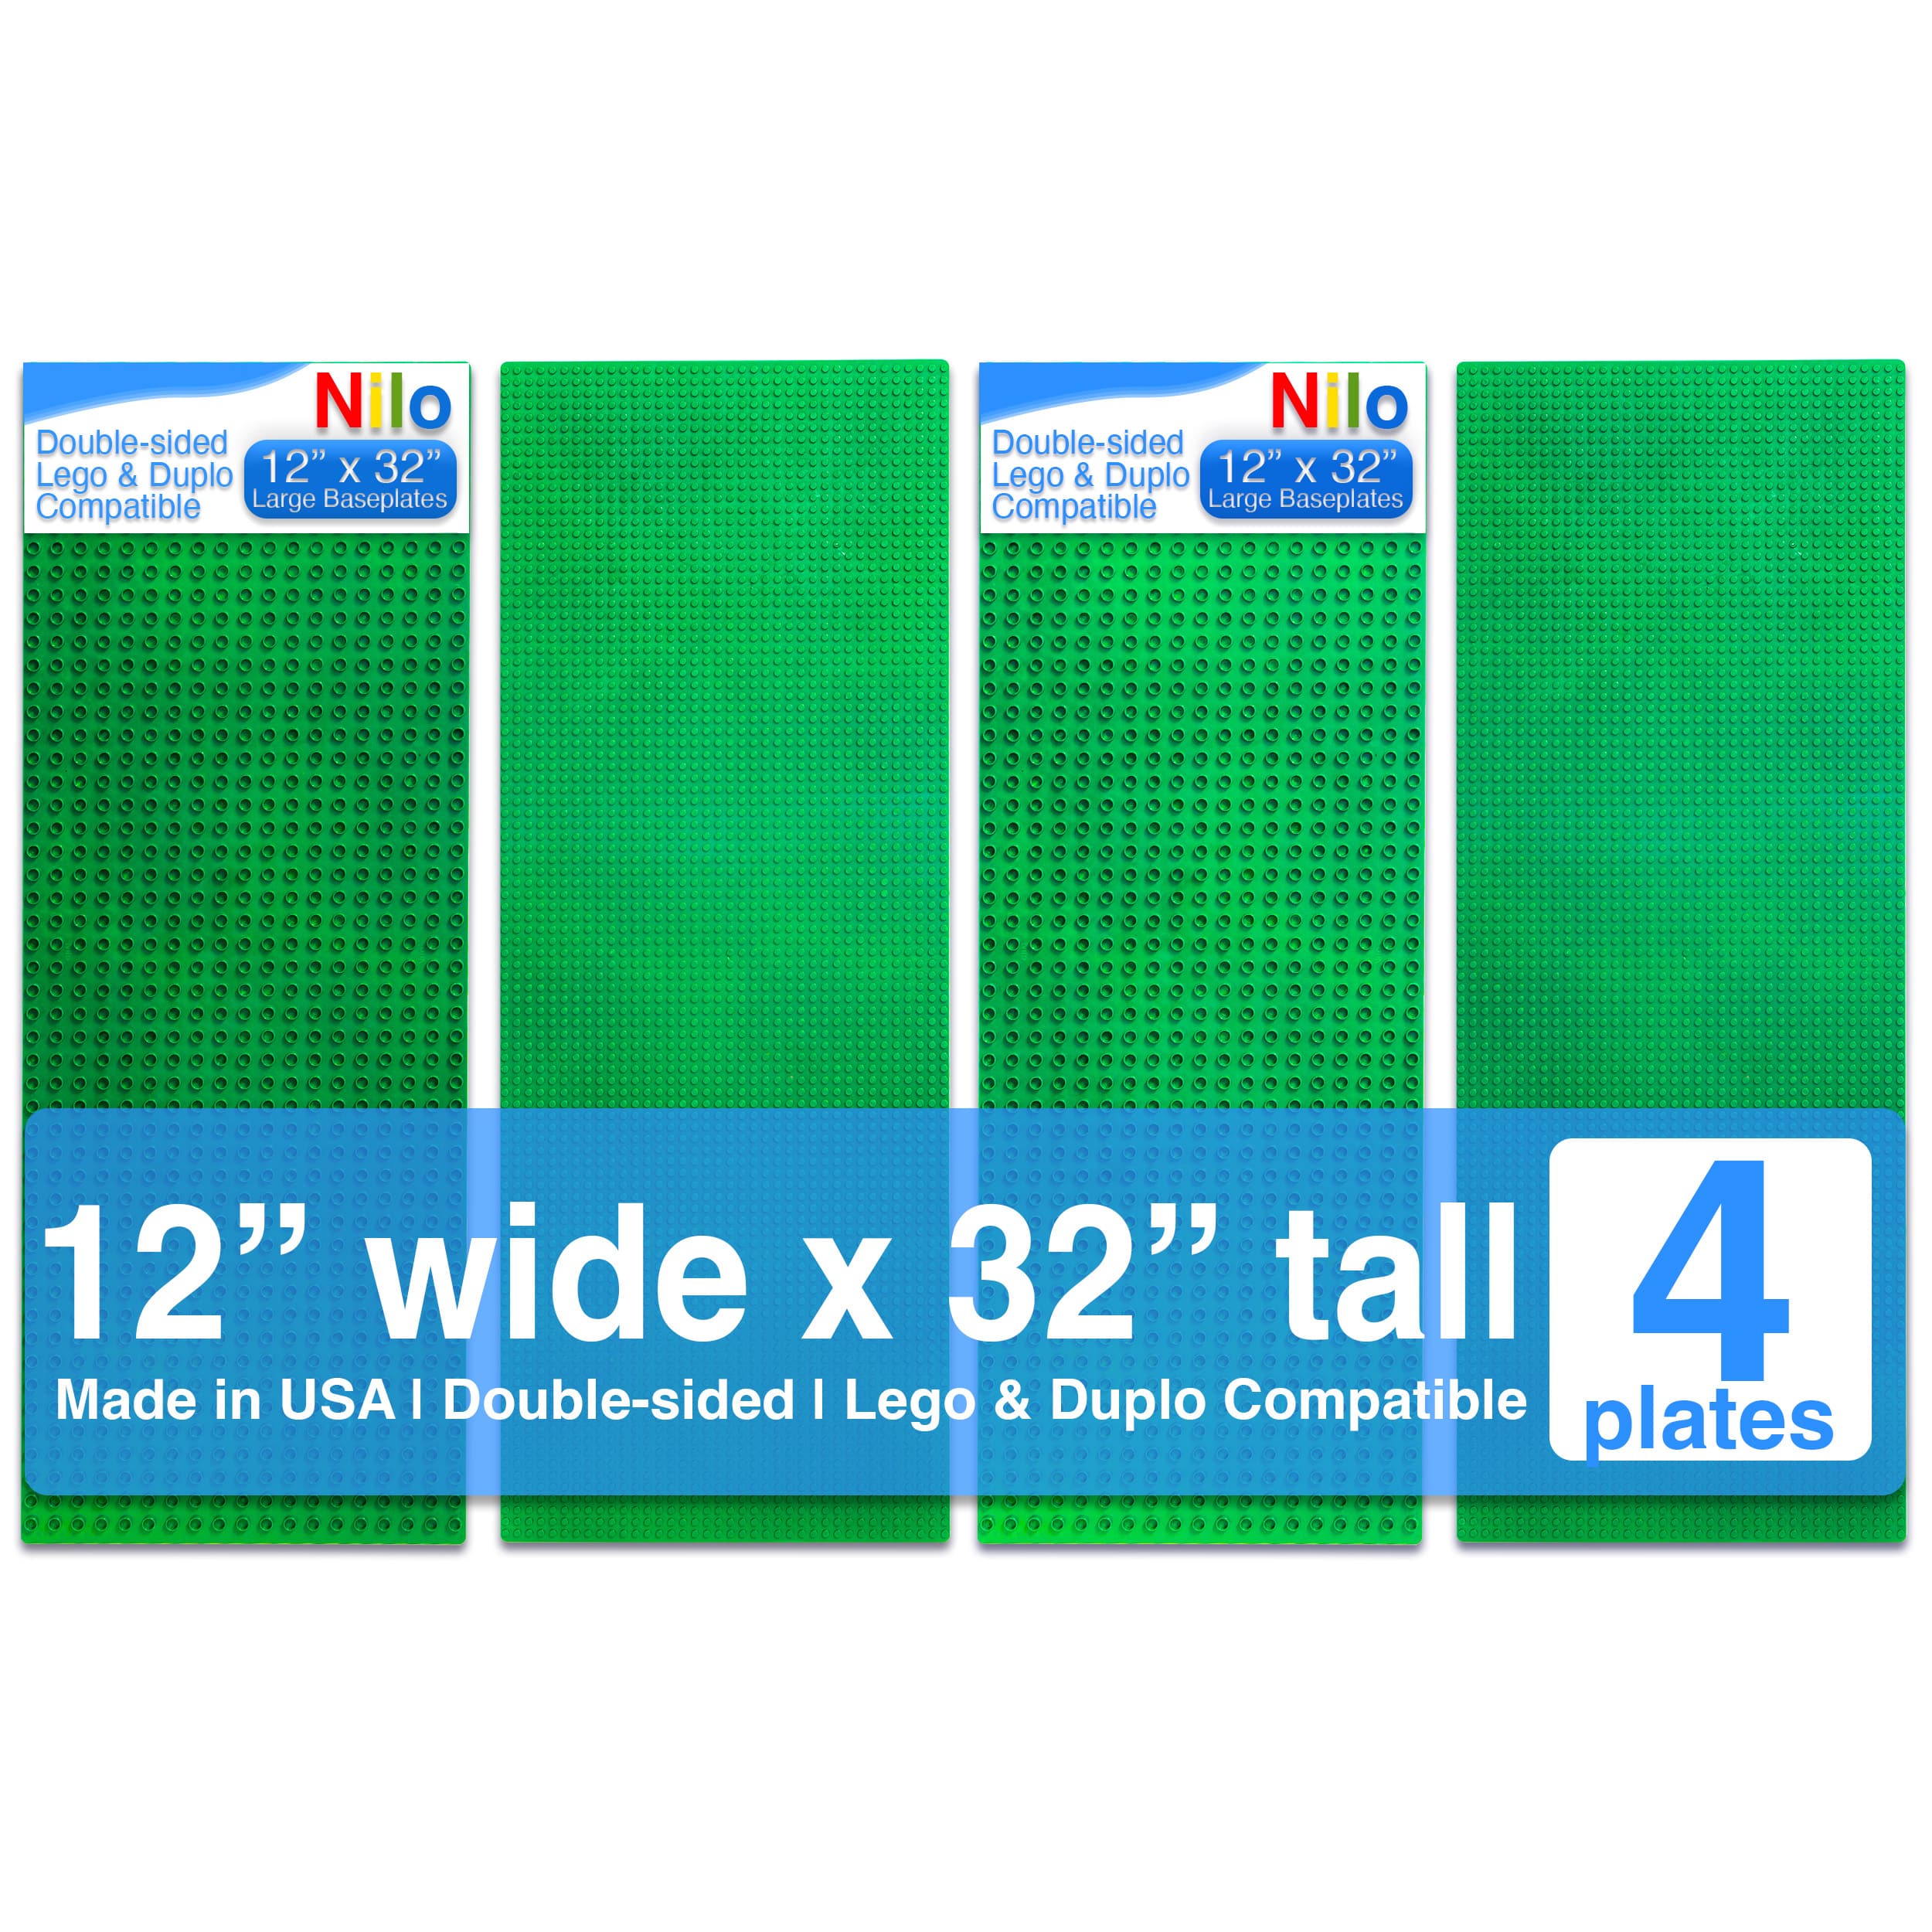 Buy 2 Green 2-Sided Base Plates for Lego & Duplo Builds by Nilo